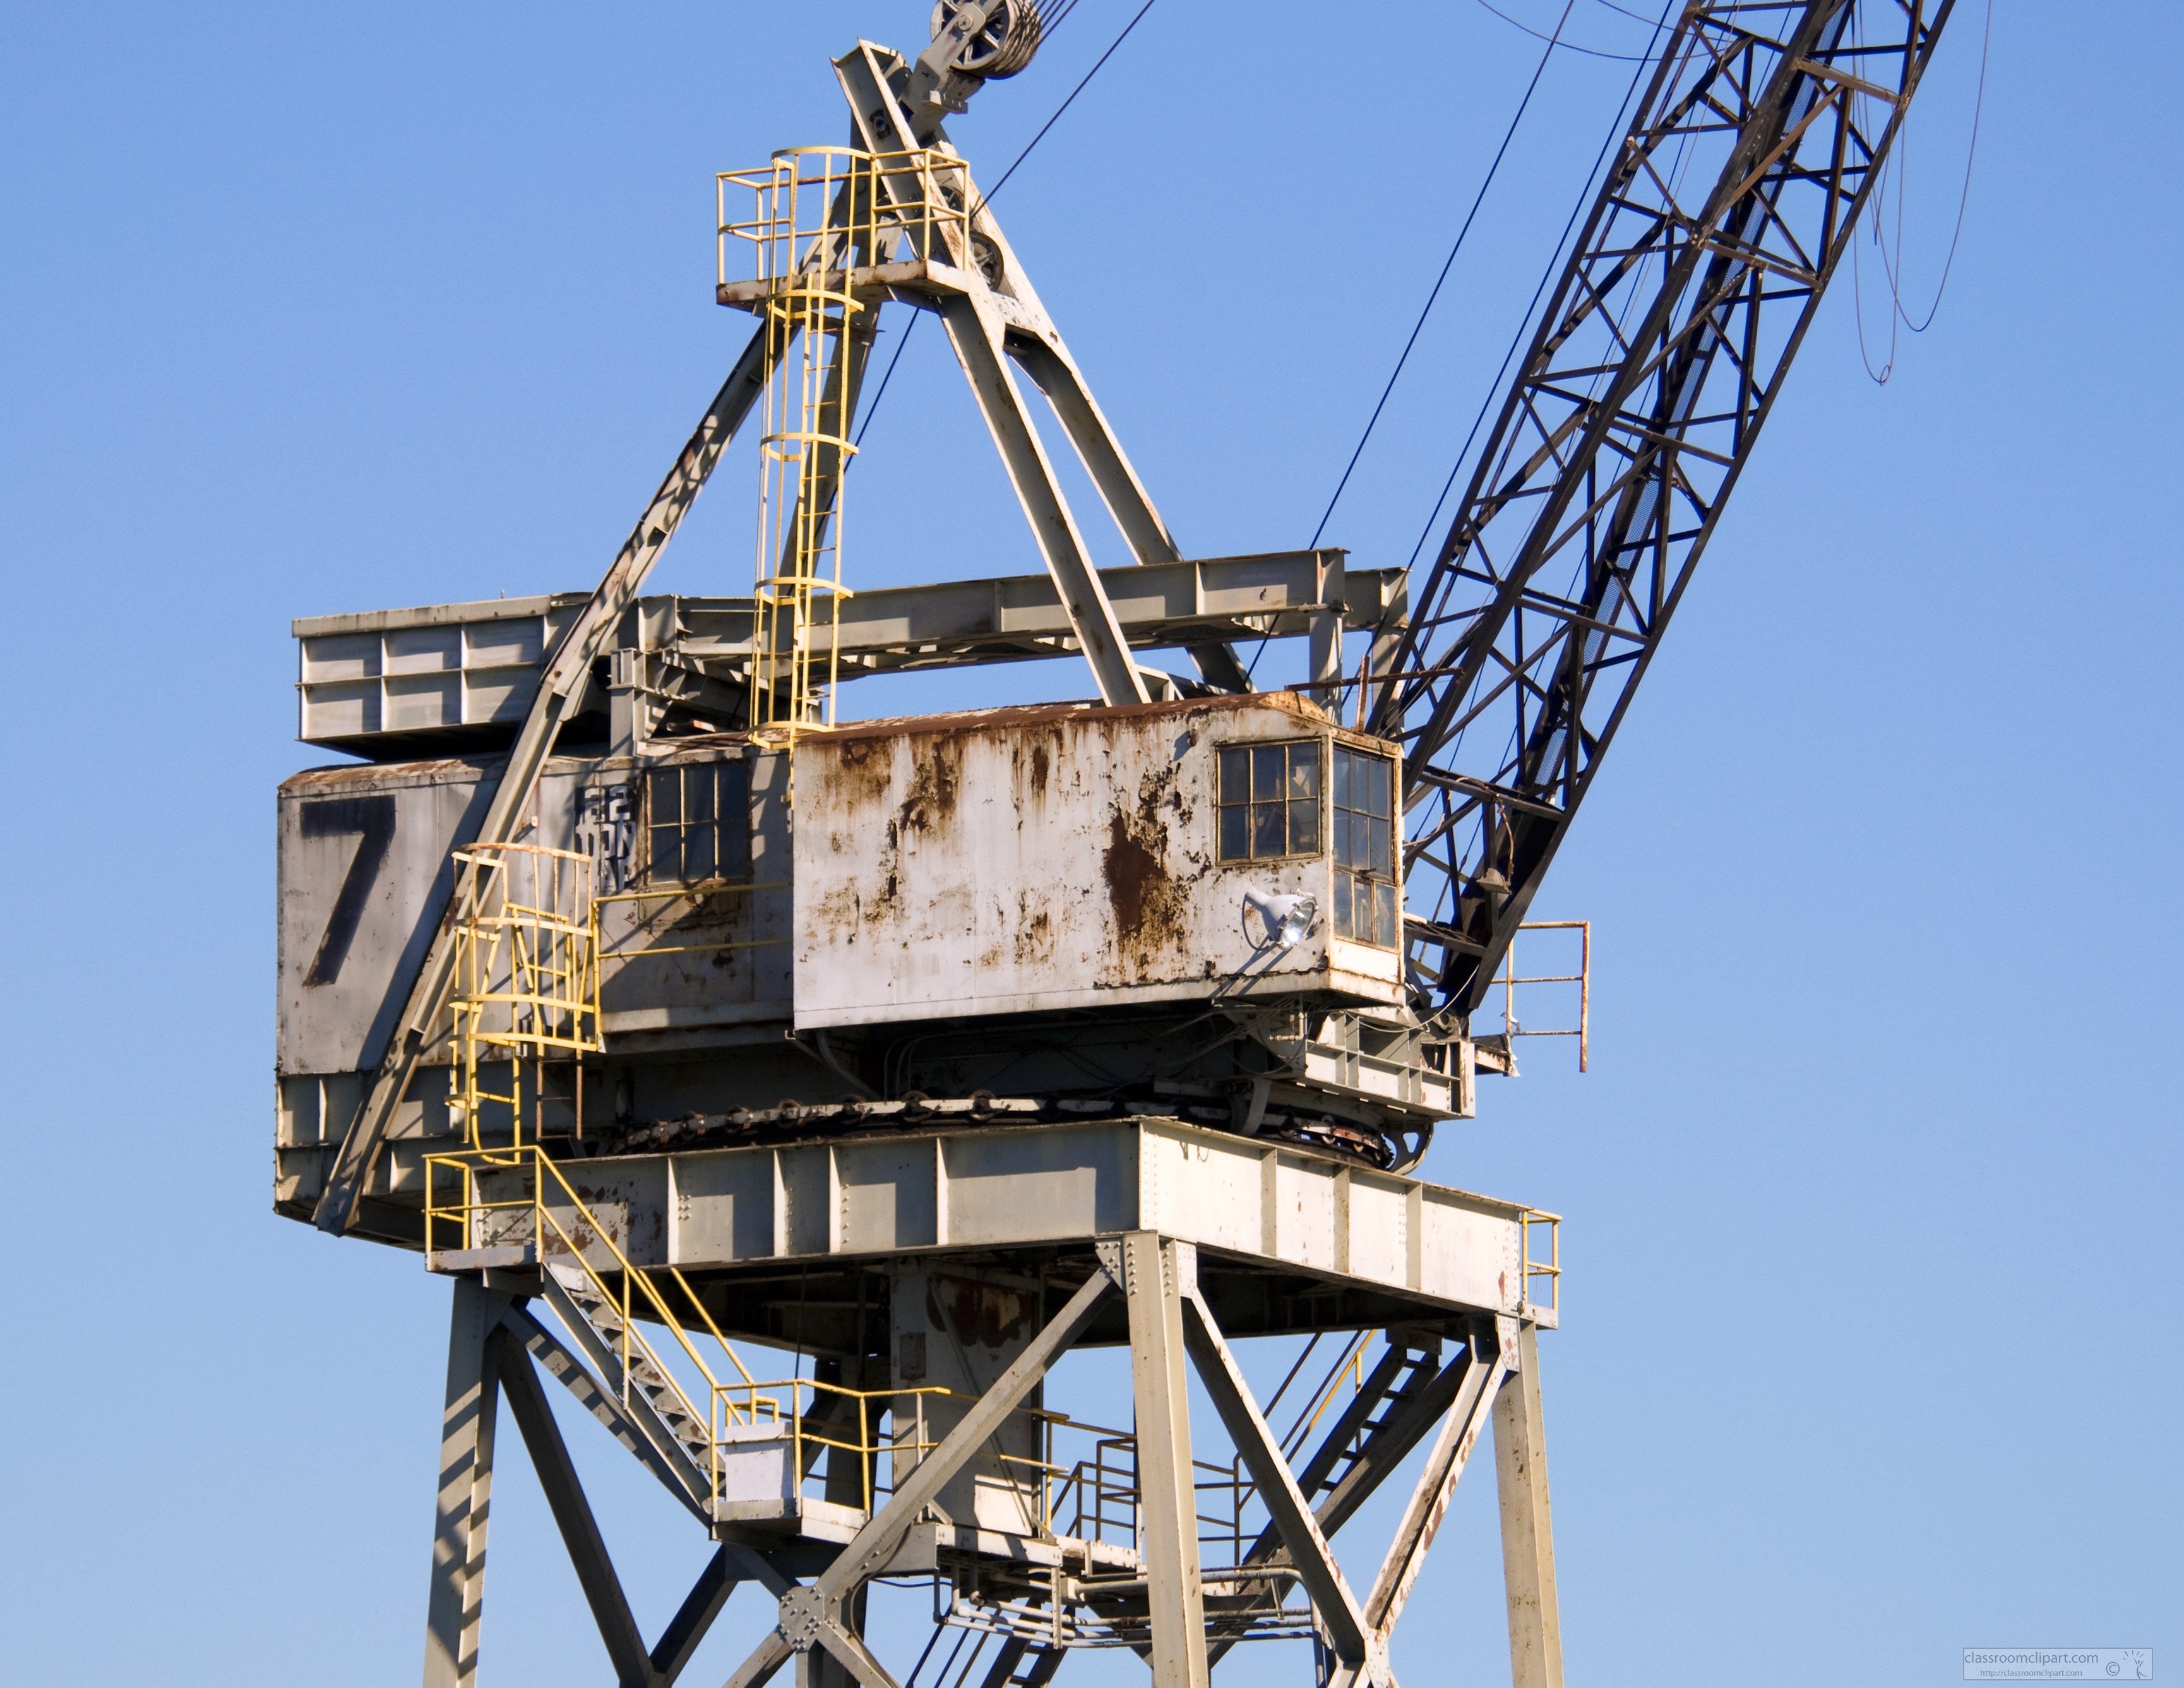 picture-of-old-looking-crane-used-for-ships.jpg